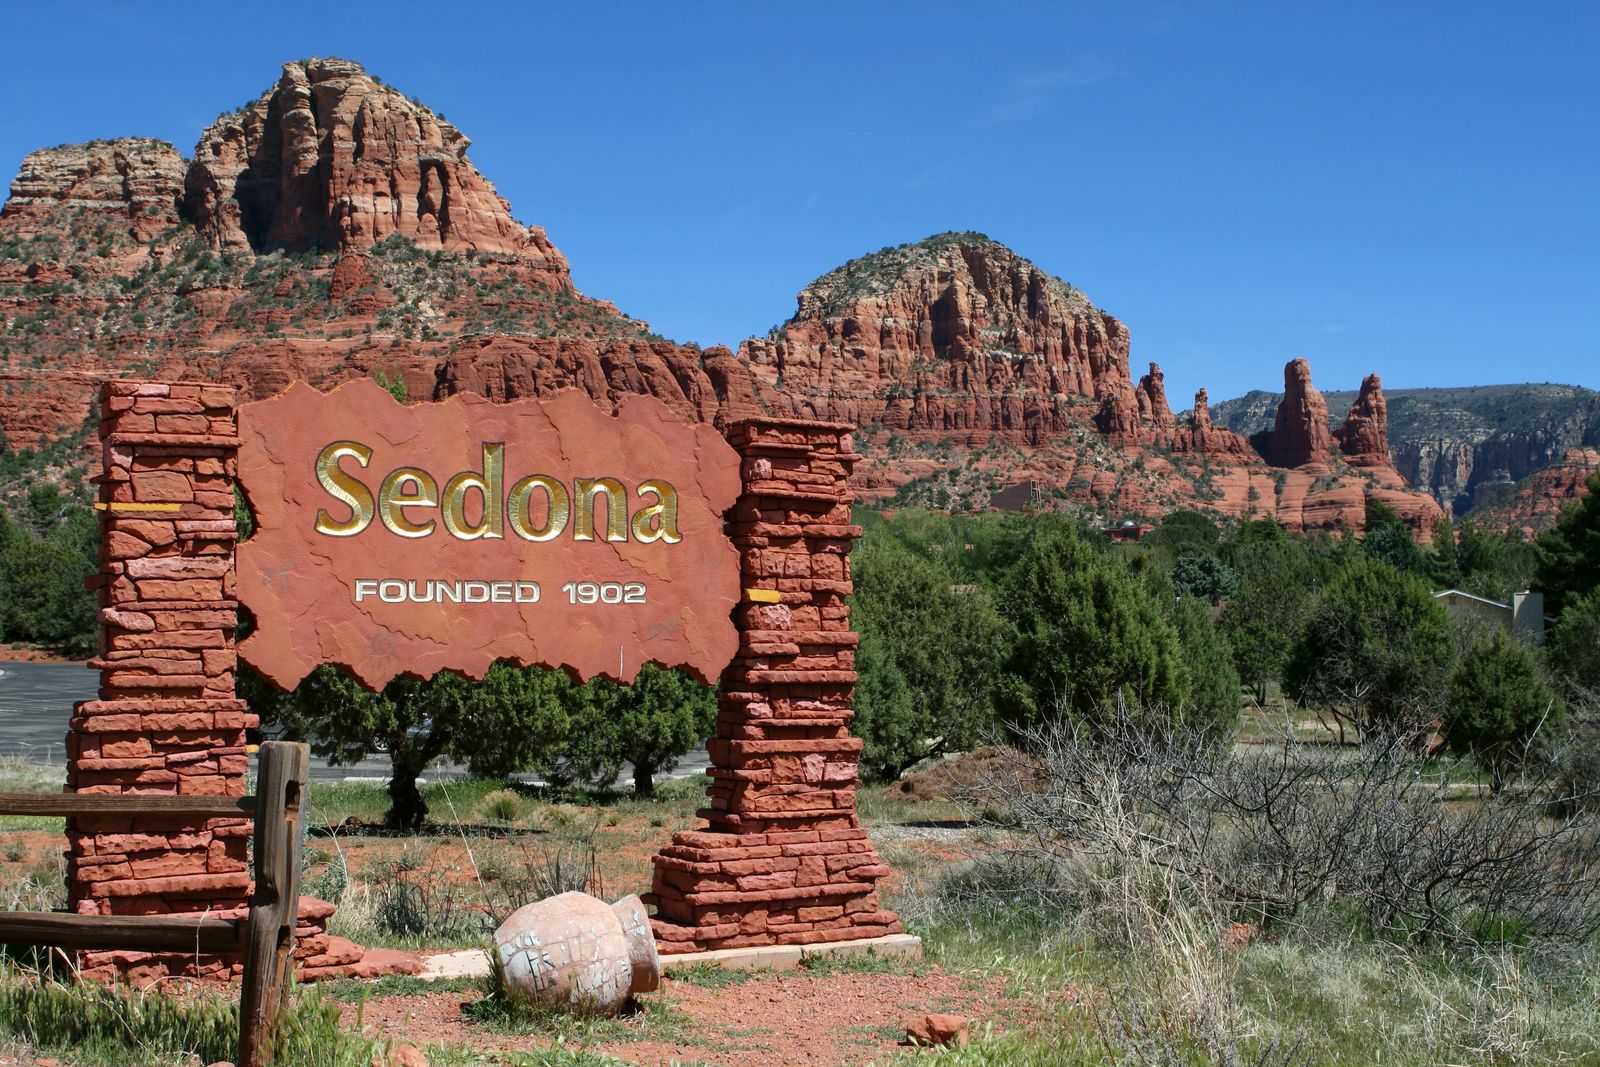 Sedona Founded in 1902 Sign - Things to do in Sedona